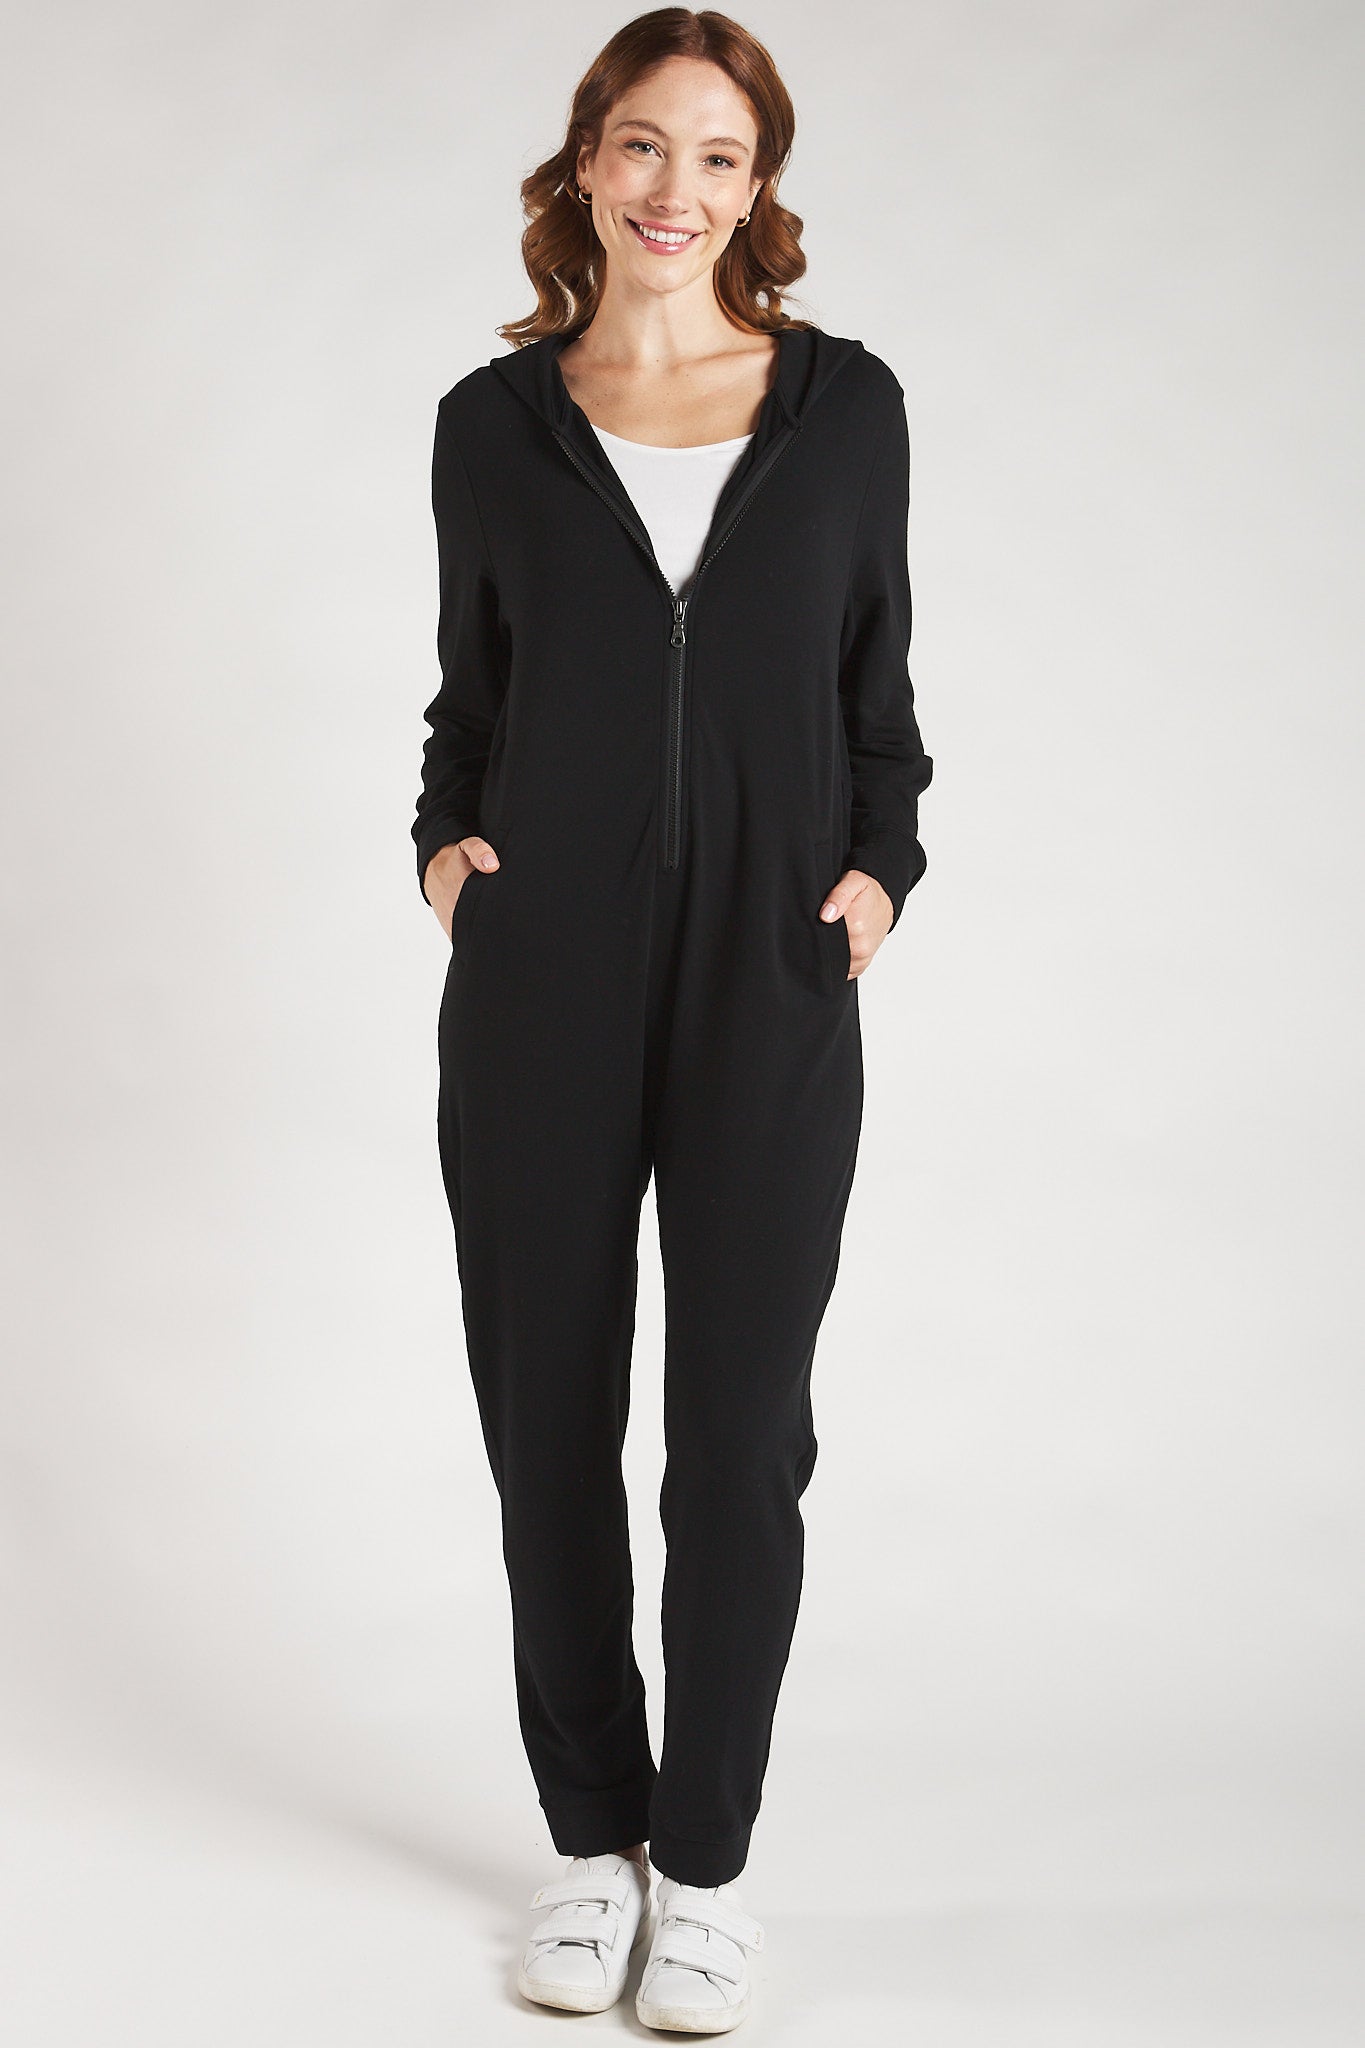 Women’s lounge jumpsuit made from sustainable bamboo fabric in black by Terrera.